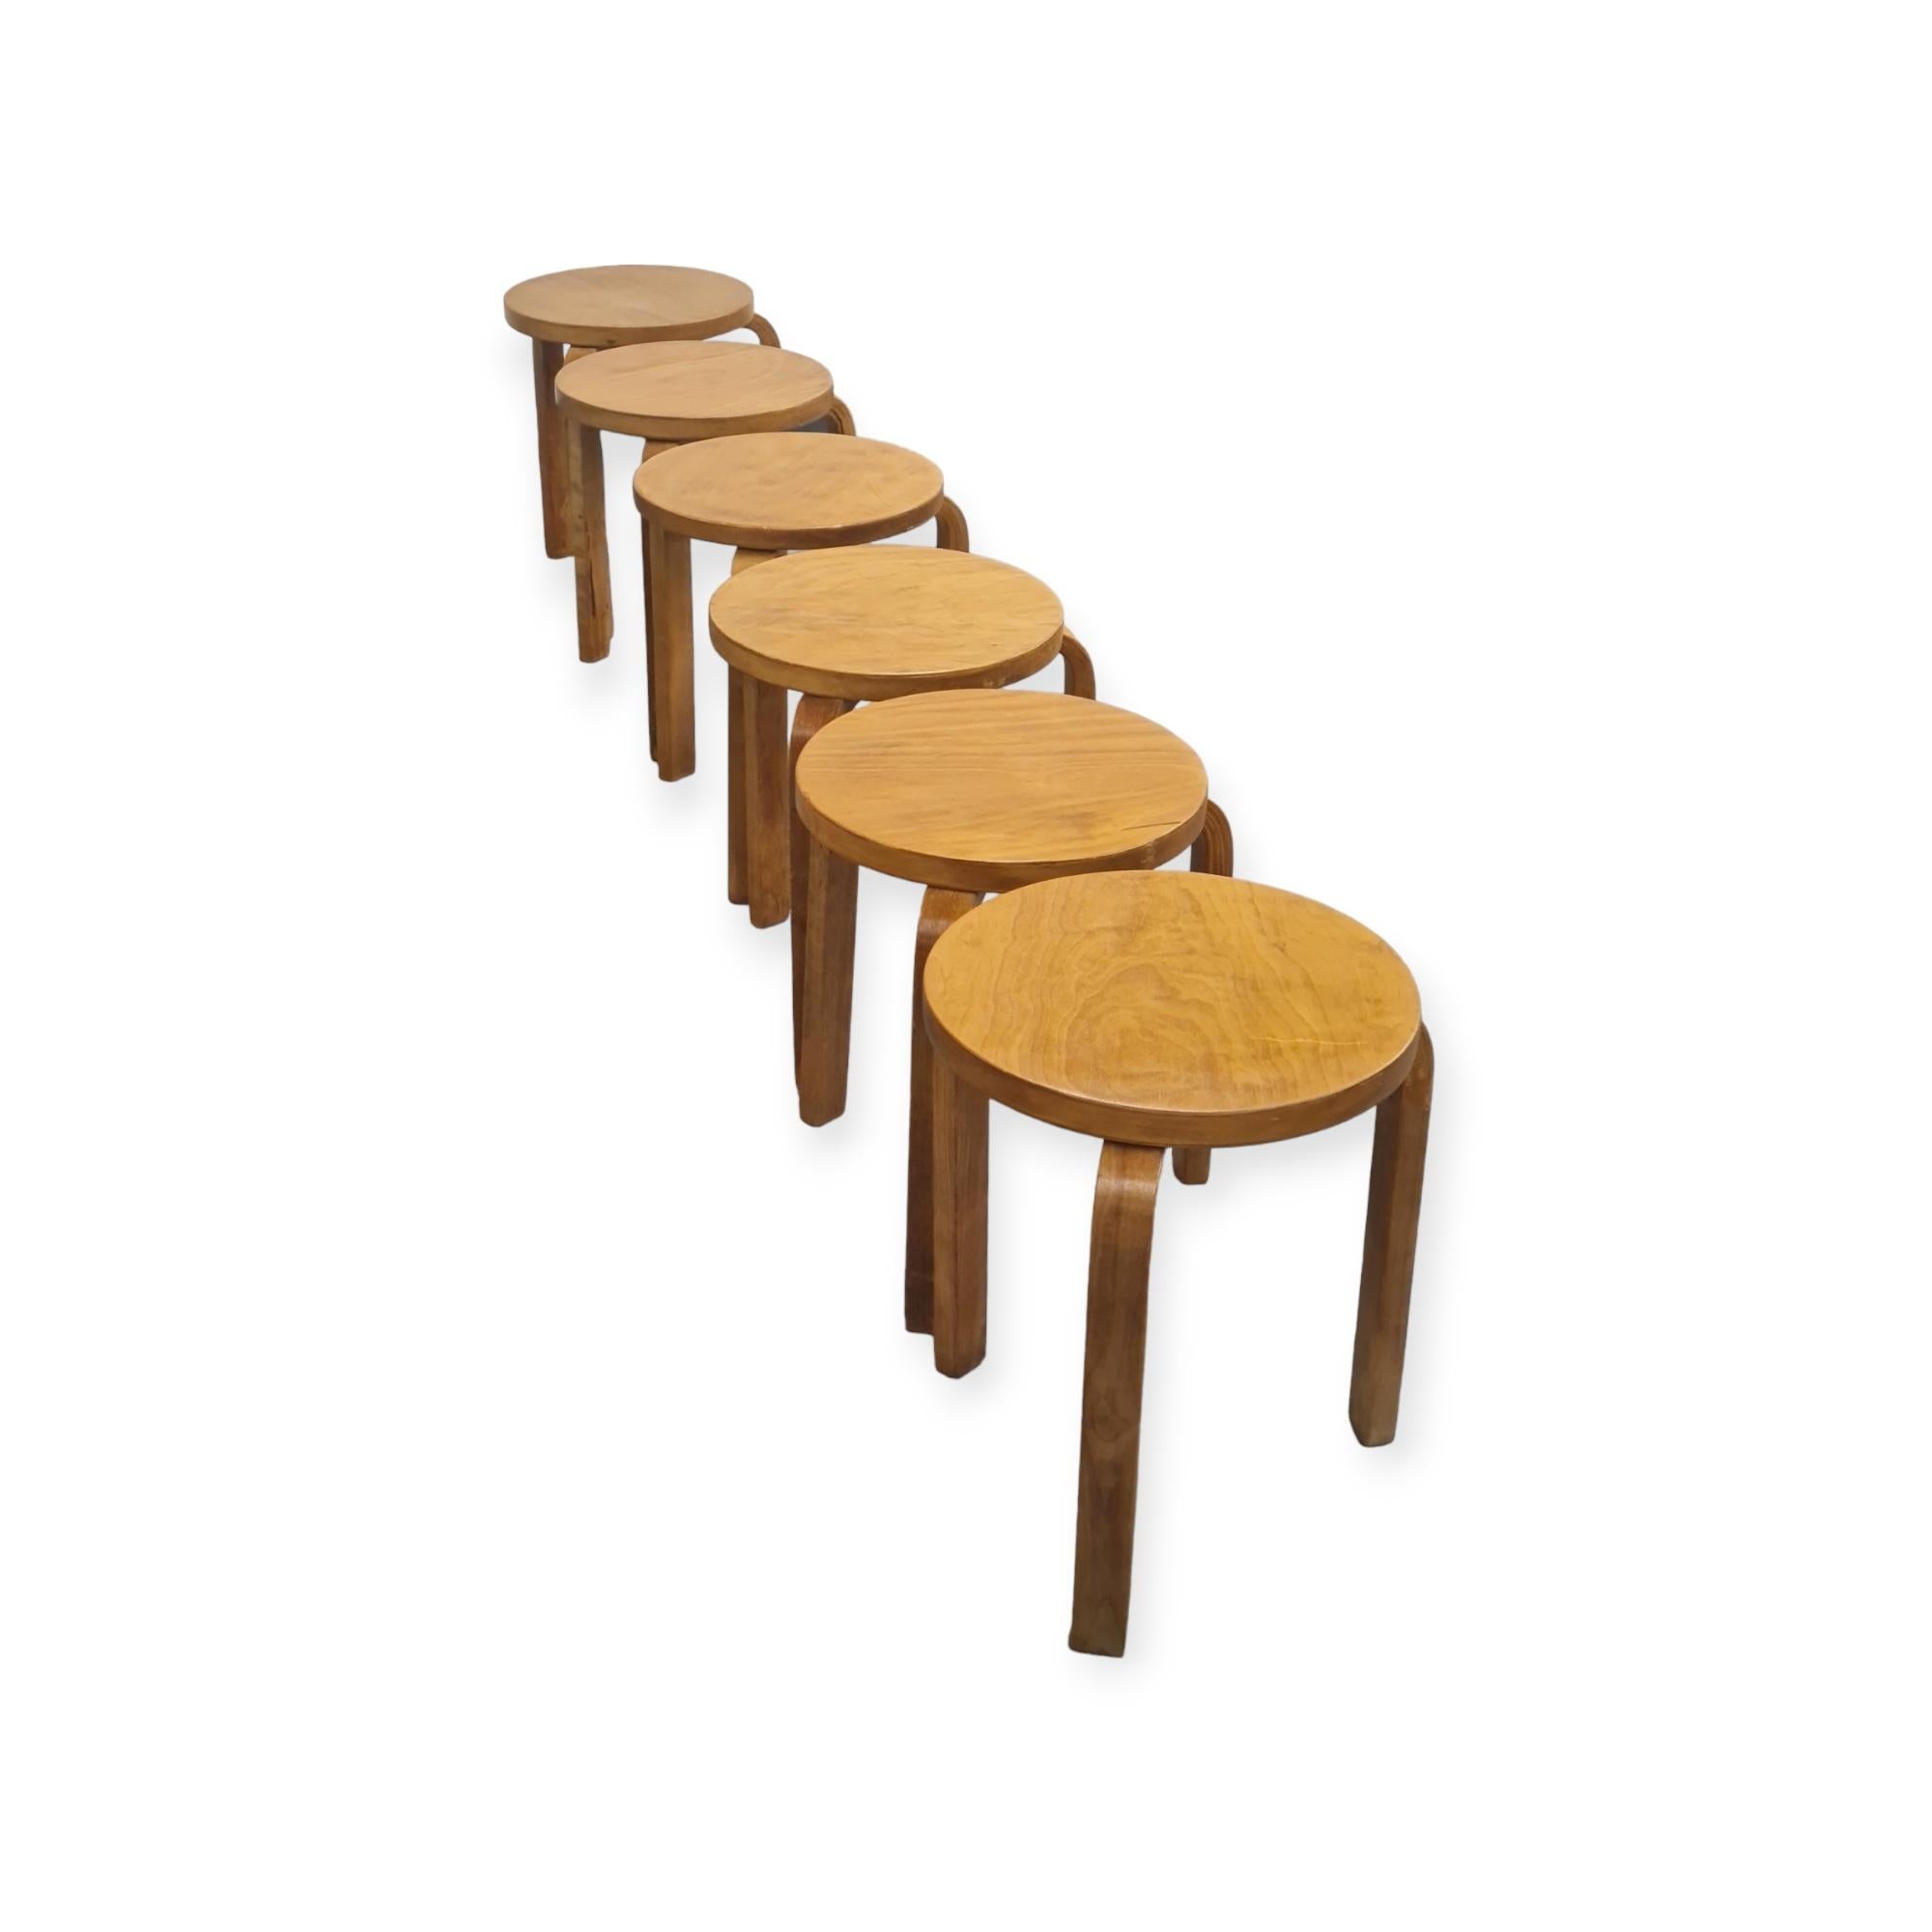 These six Alvar Aalto iconic stools from 1930s are beautiful and space saving furniture pieces of timeless design. The legs are mounted directly to the underside of the round seat without the need for complicated connecting elements. The stools can